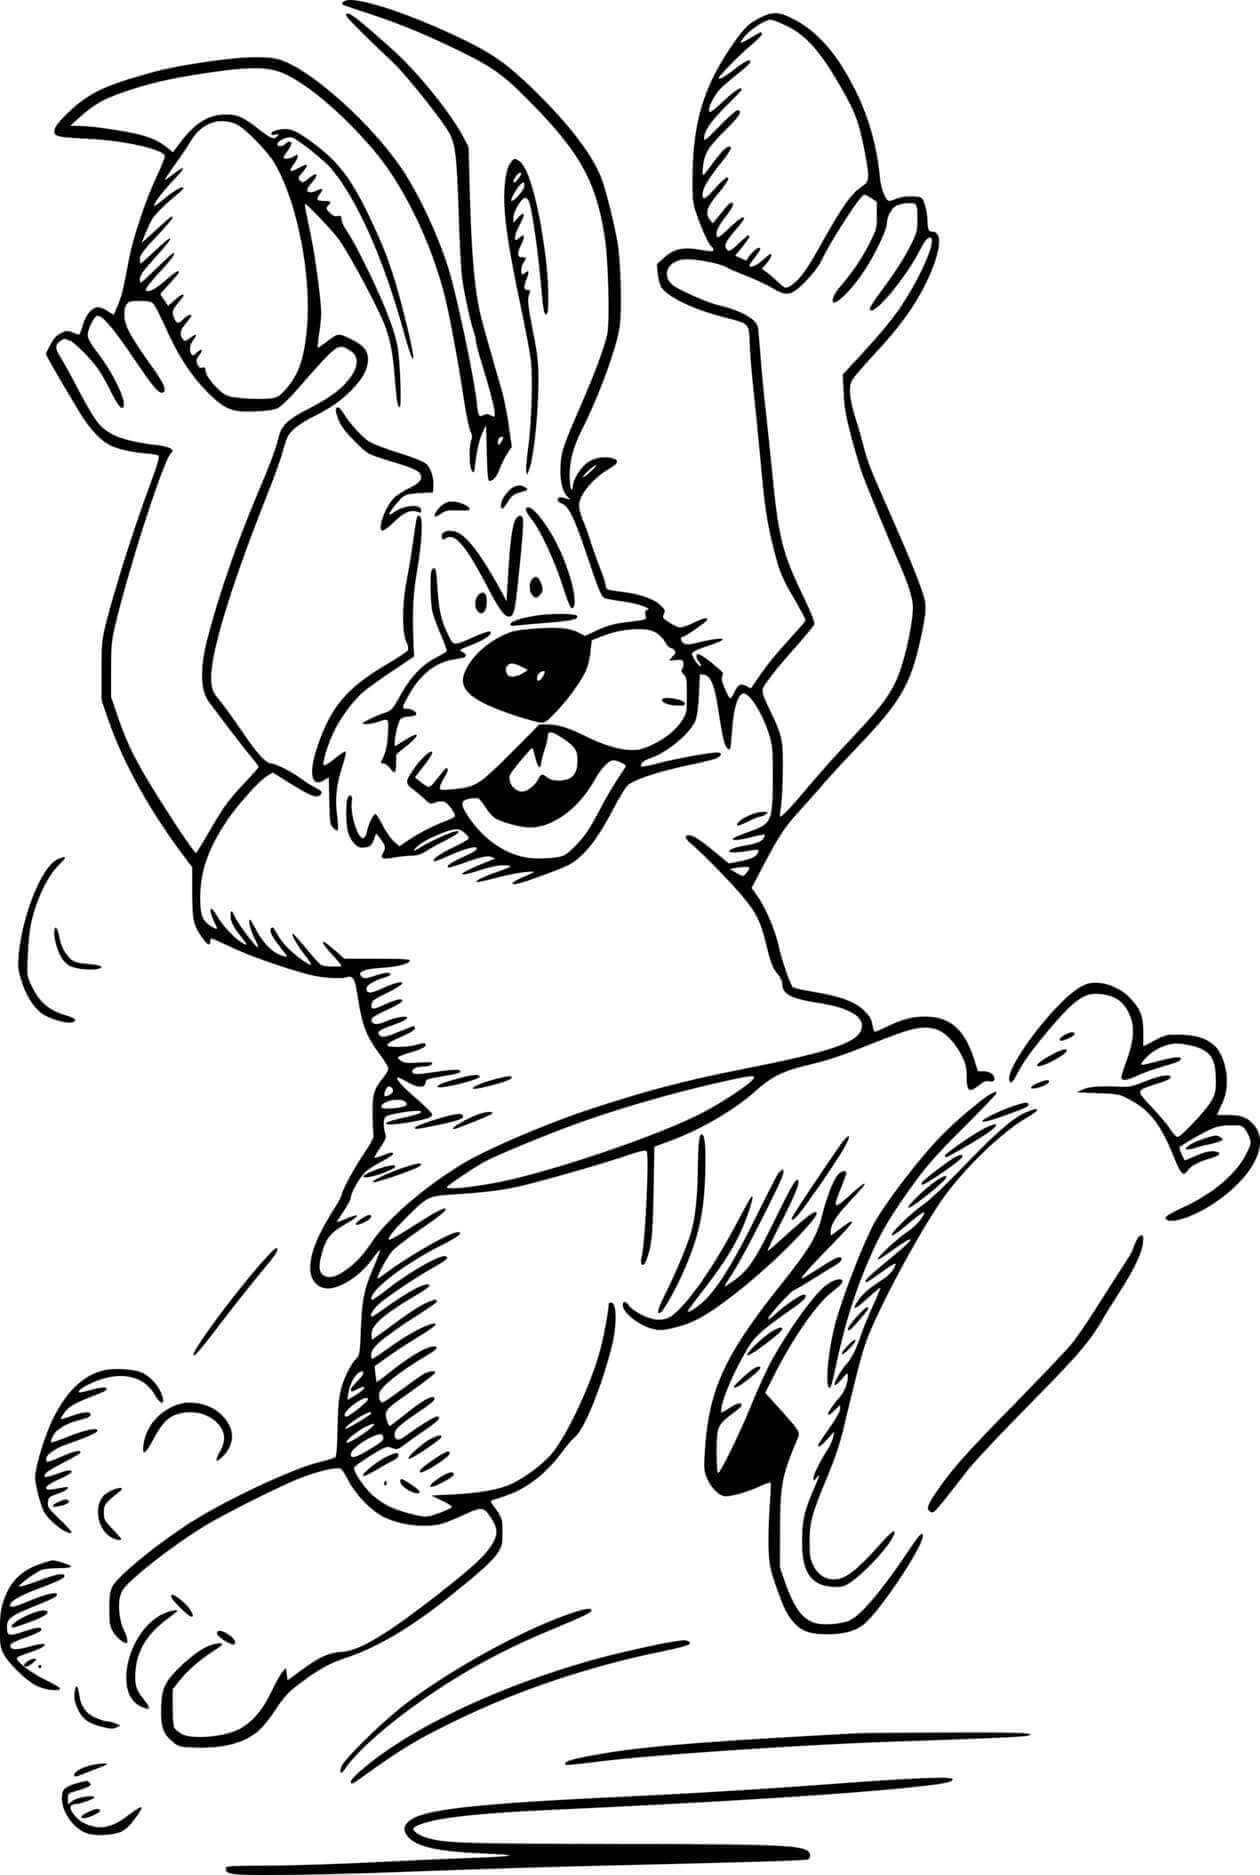 Running Easter Bunny Holds Two Eggs